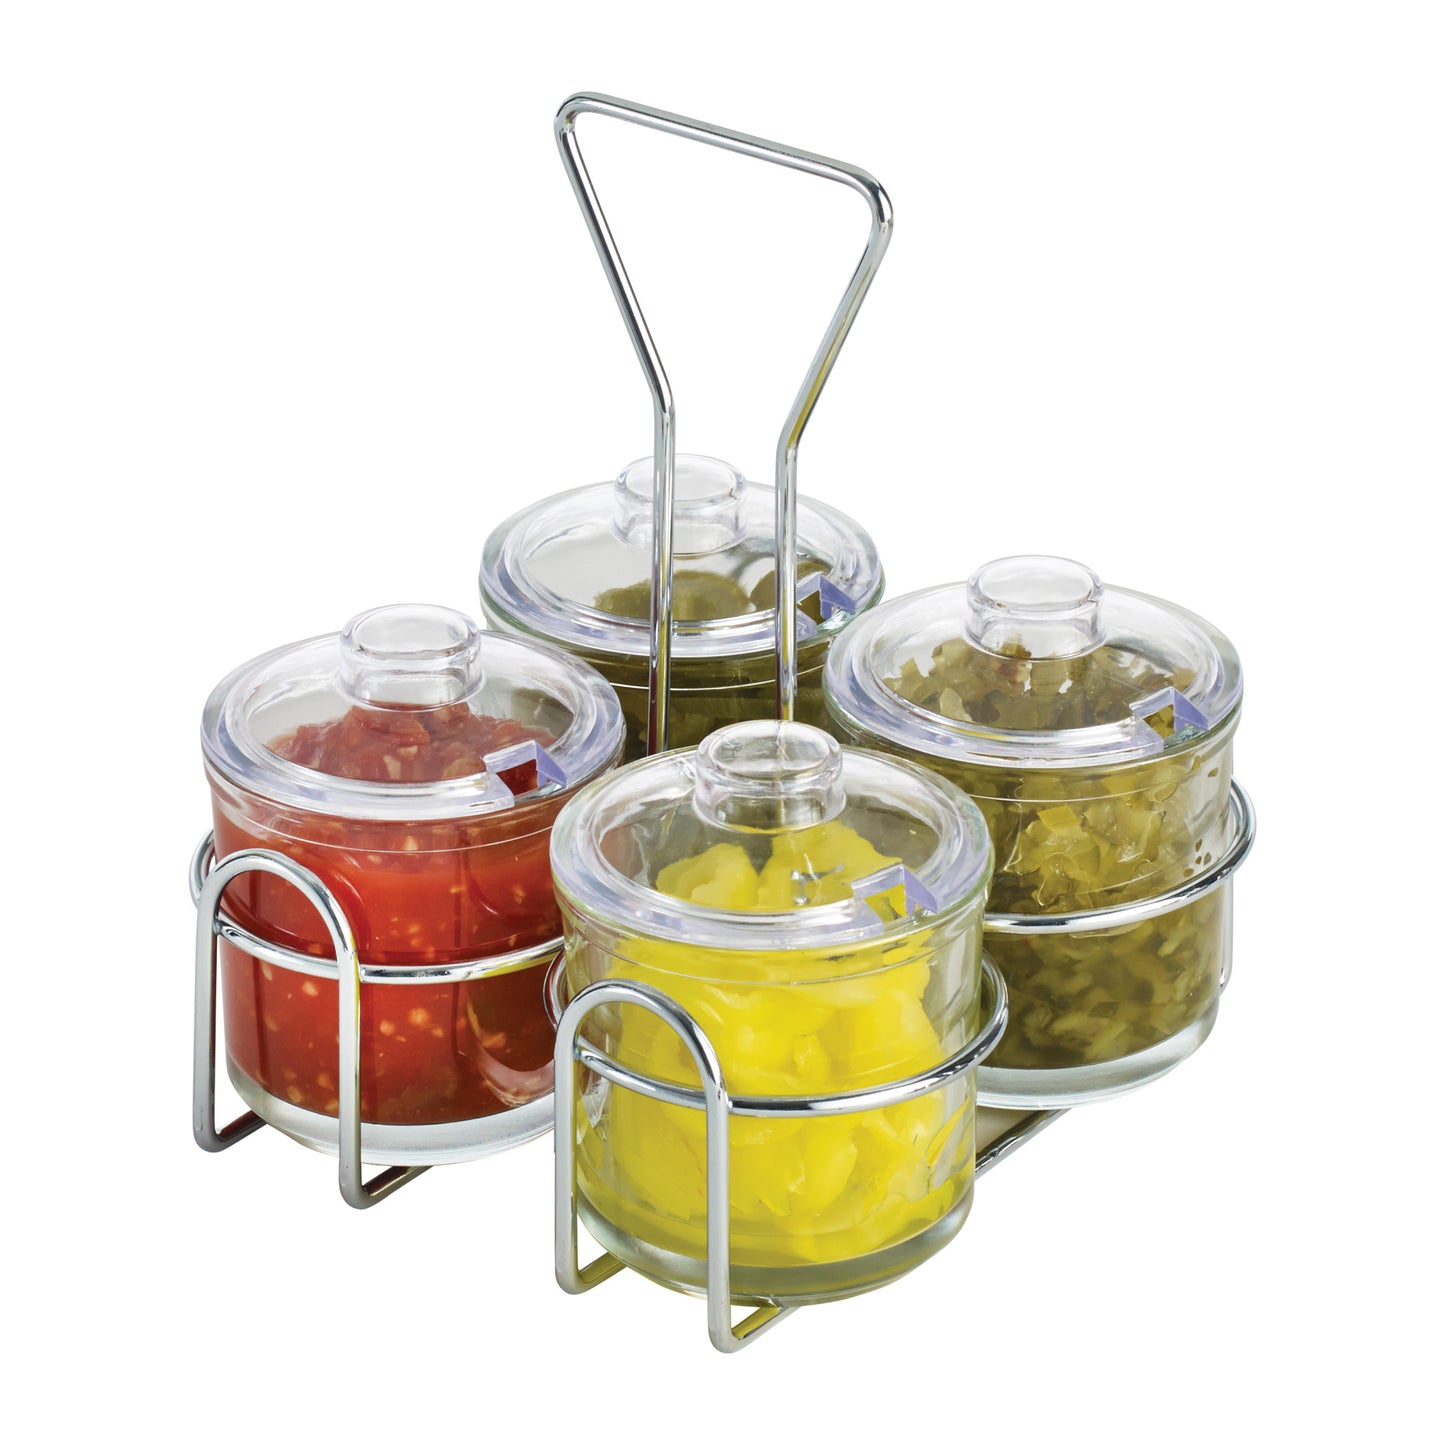 WH-9 - Chrome Plated 4-Ring Condiment Jar Rack